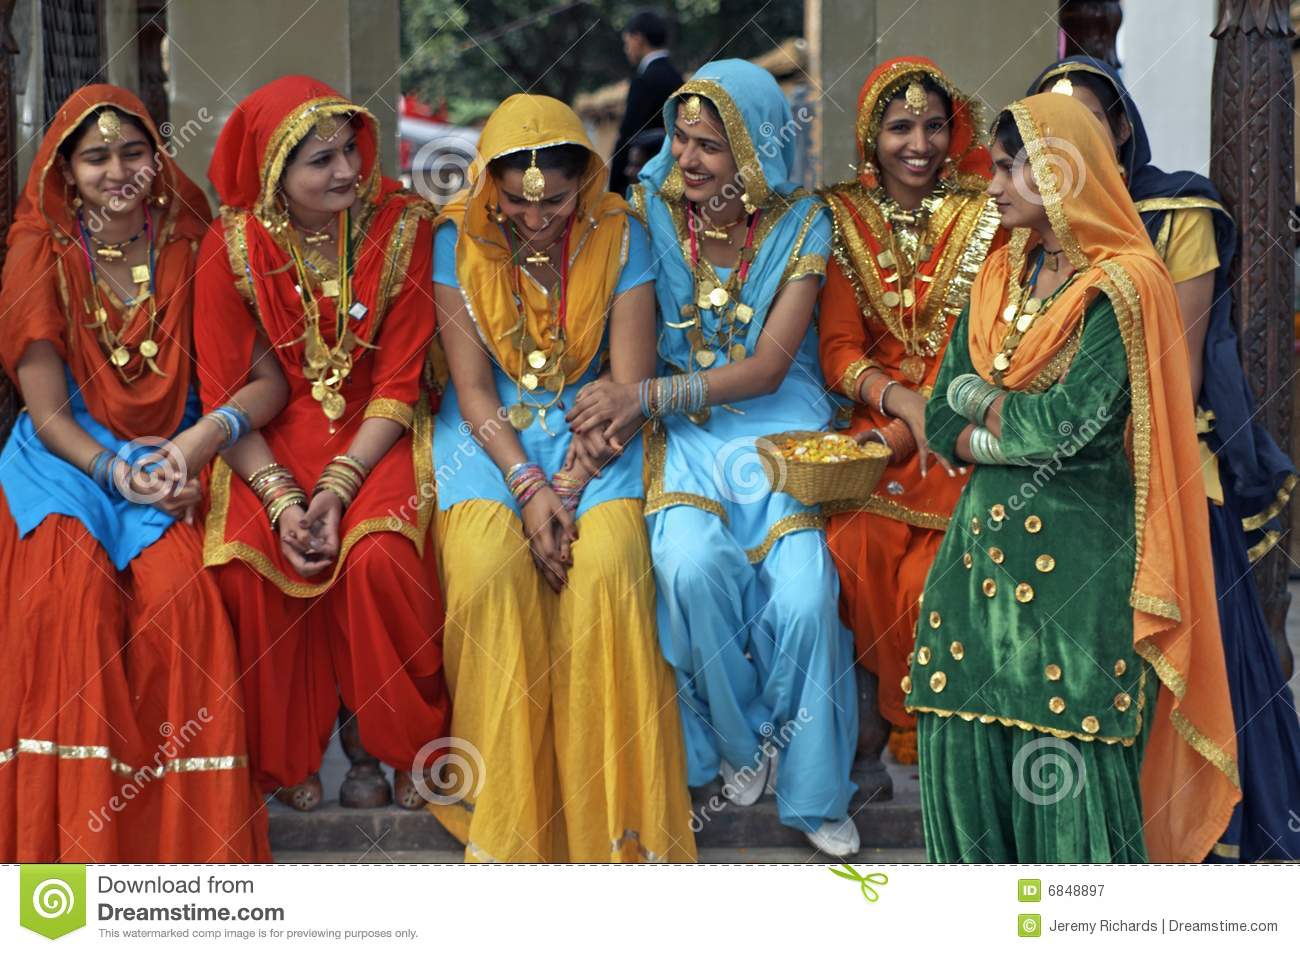 colorfully-dressed-indian-women-6848897.jpg